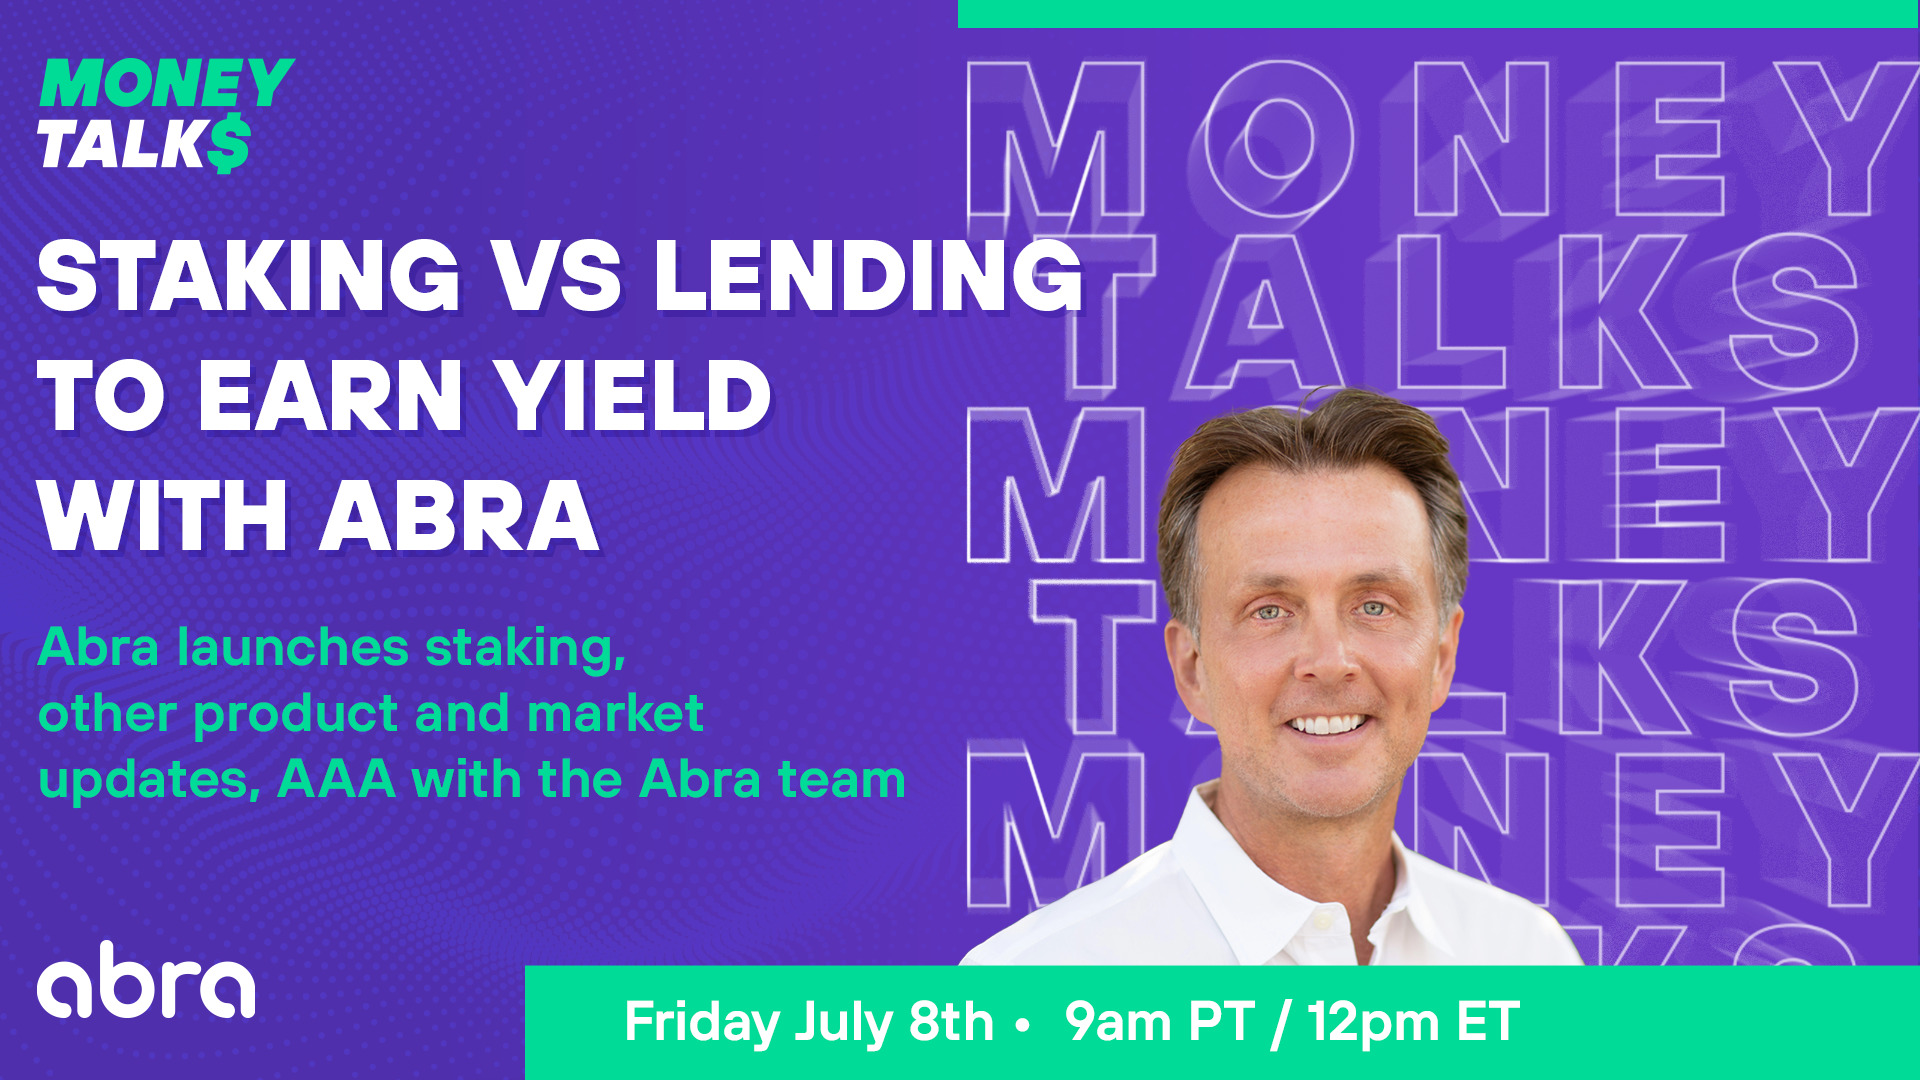 Staking Vs Lending To Earn Yield With Abra